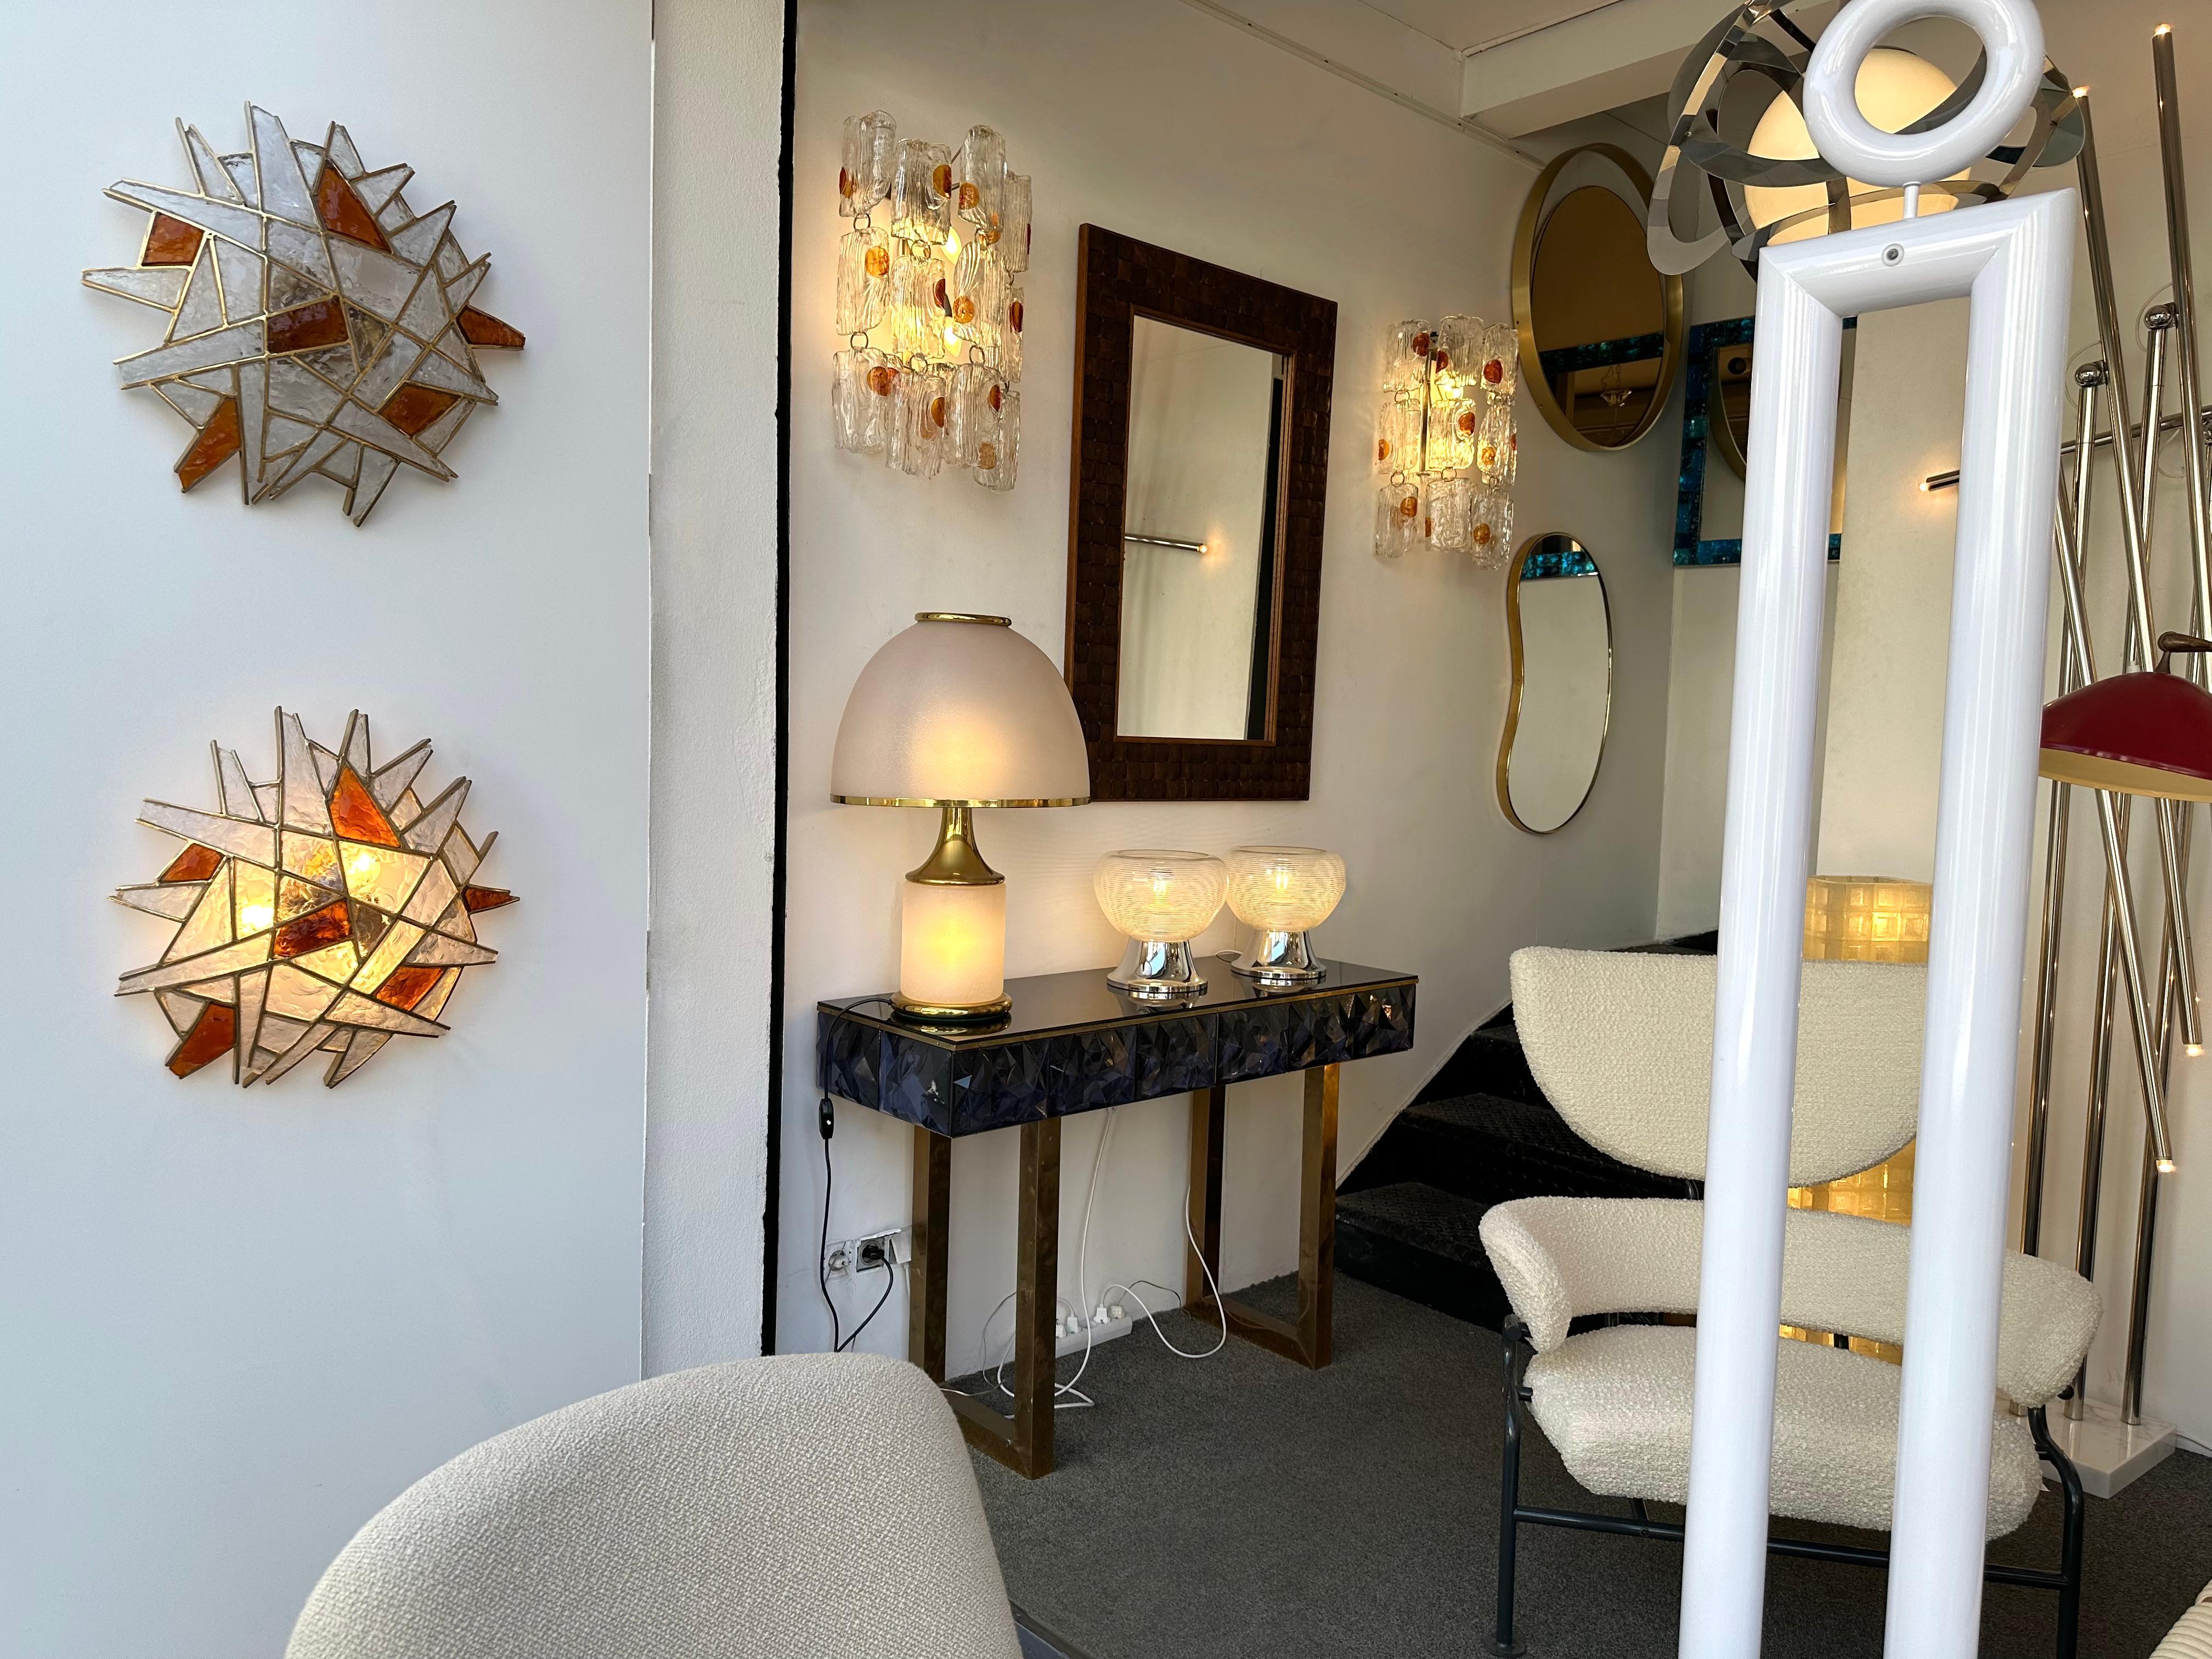 Large Mid-Century Modern pair of wall lamps lights lightning sconces hammered glass and wrought iron, gilding gilt gold patina, by the manufacture Longobard in Verona in a Brutalist style, the concurrent of Biancardi Jordan Arte and Poliarte during